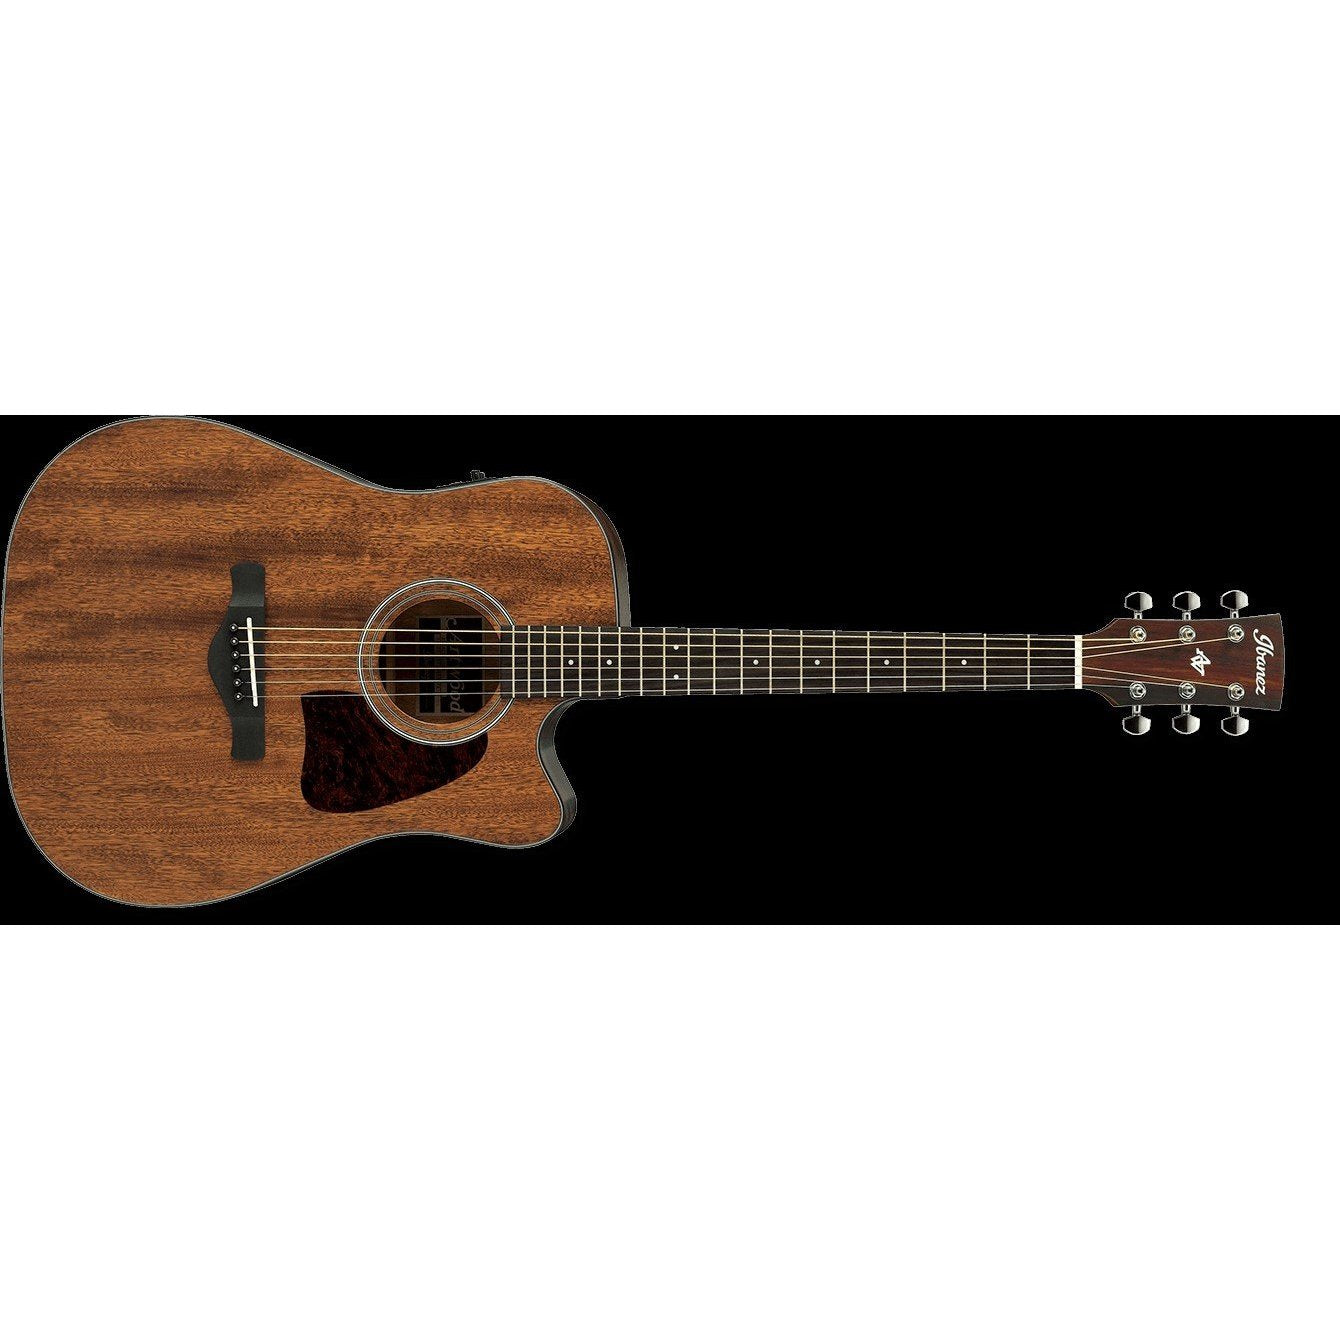 Ibanez AW54CE-OPN Artwood Acoustic/Electric Guitar-Open Pore Natural-Music World Academy